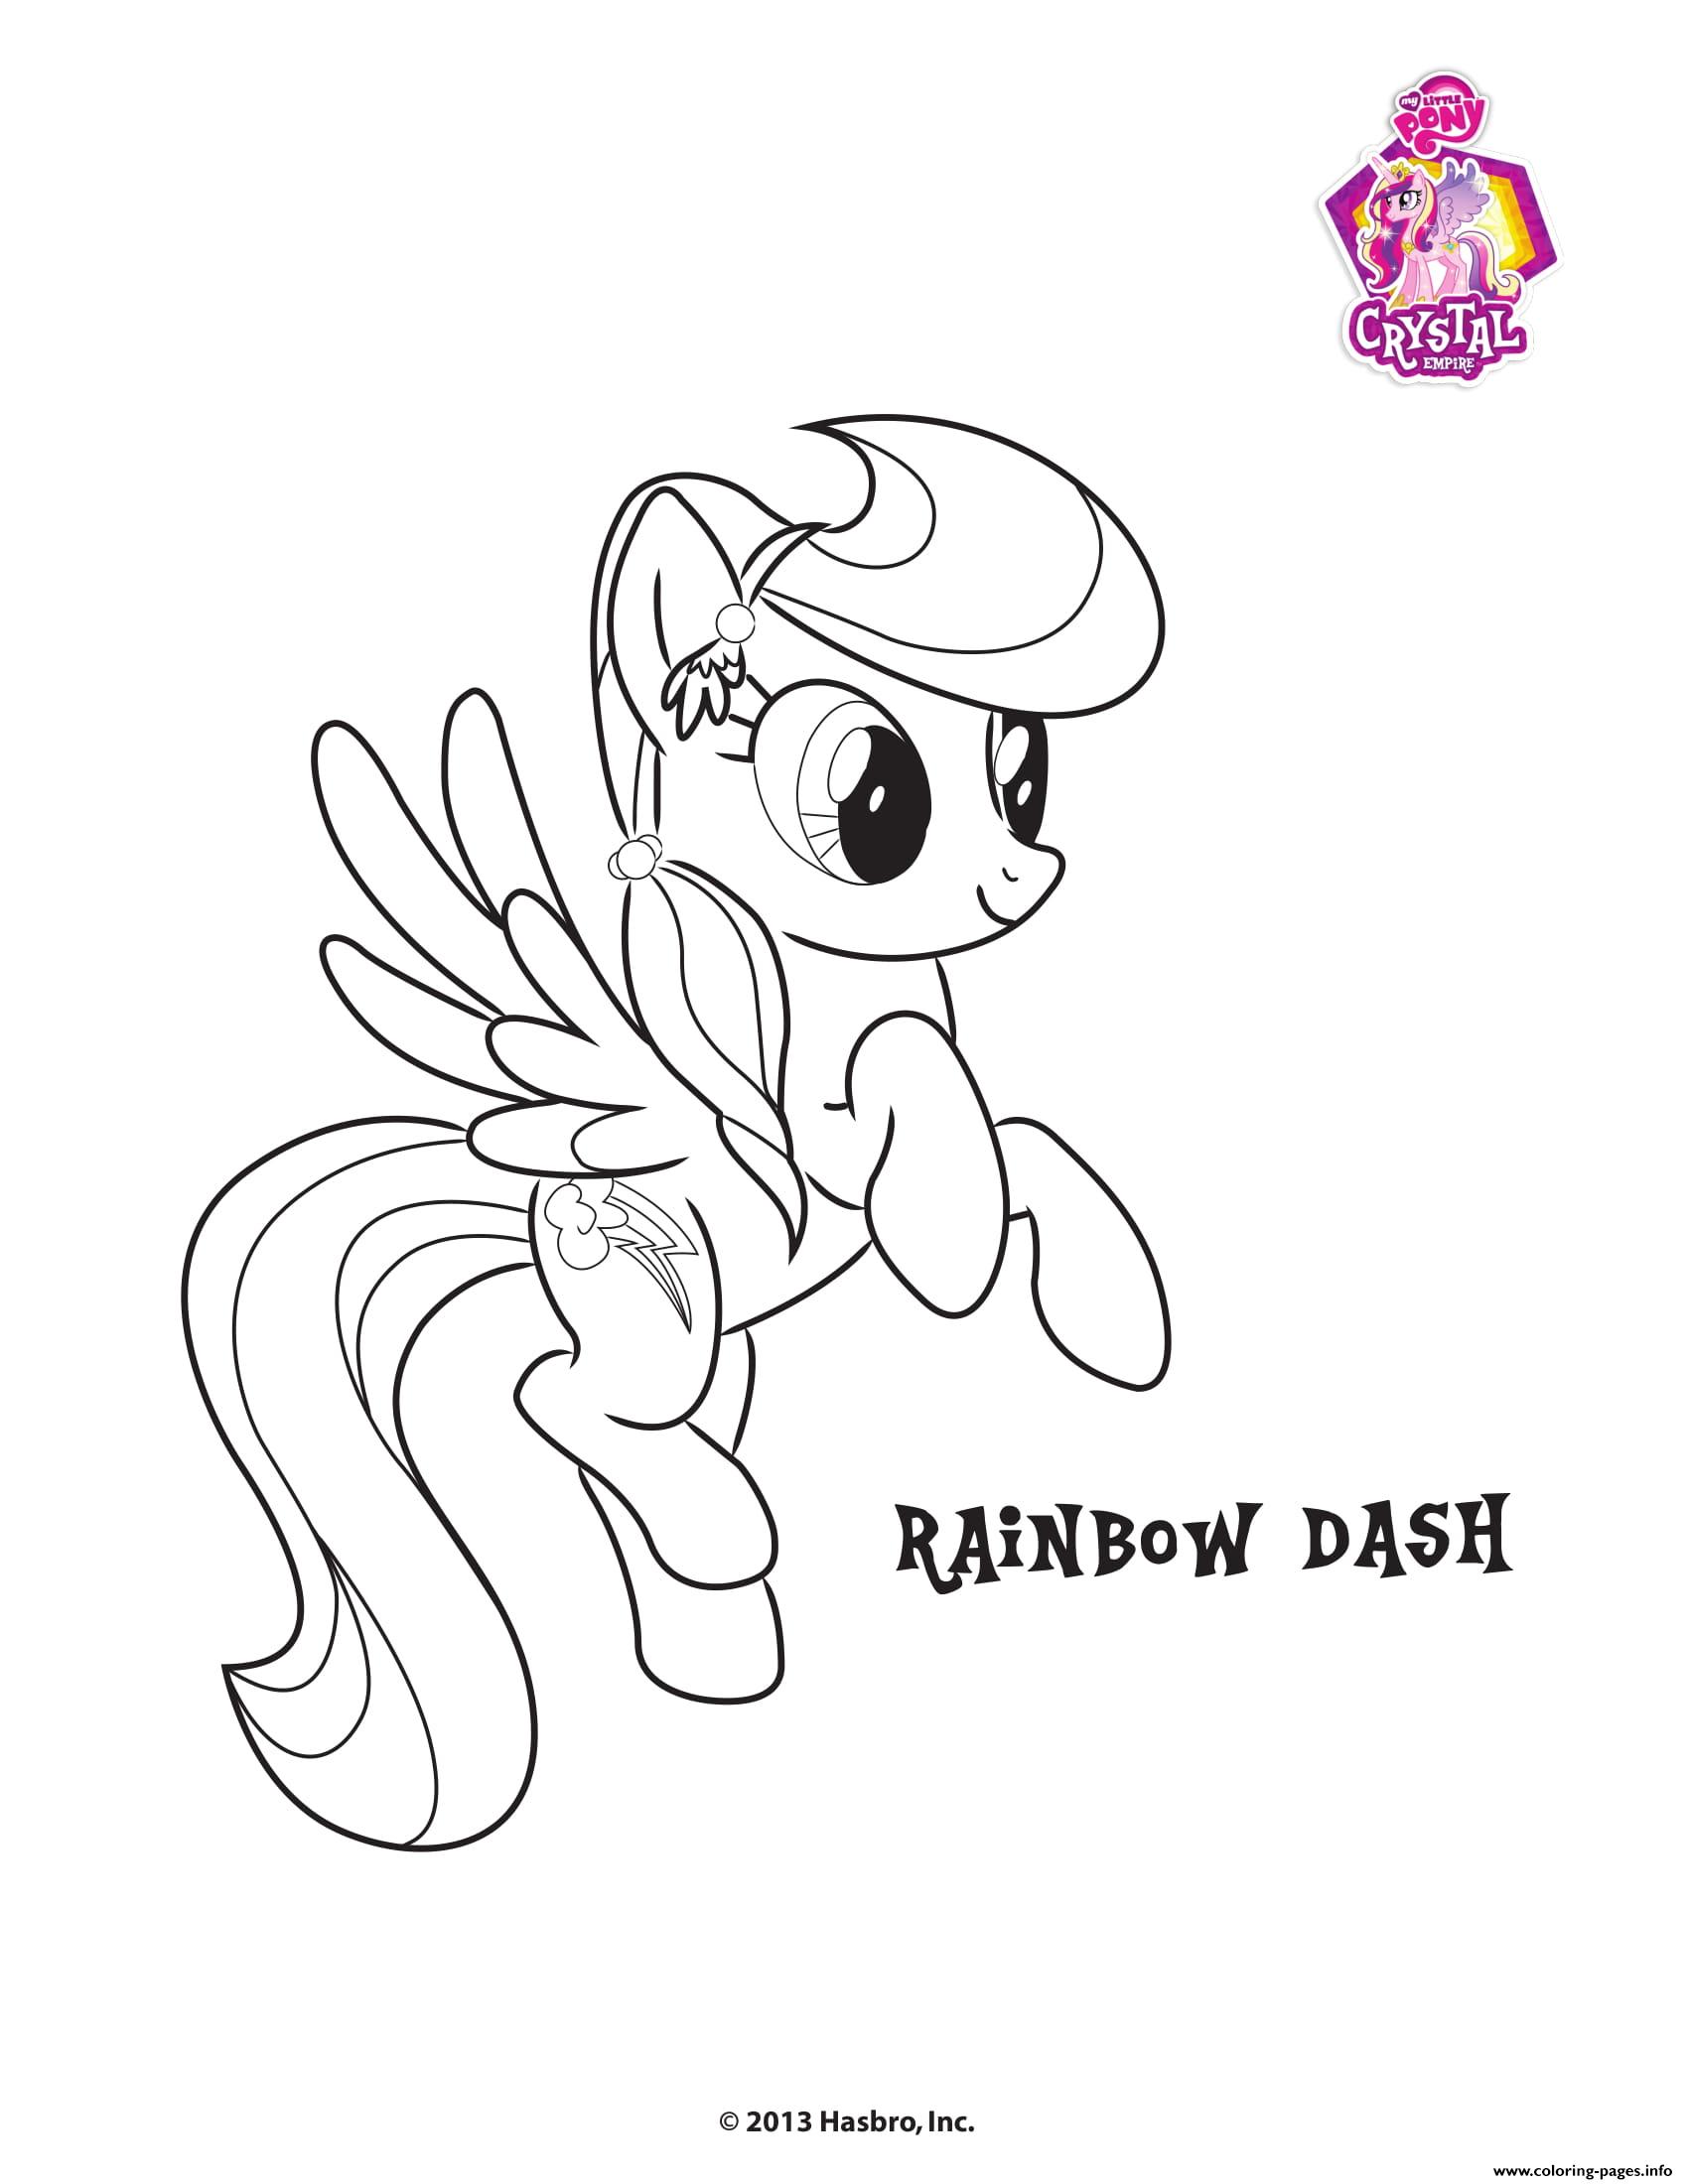 Rainbow dash crystal empire my little pony coloring page printable